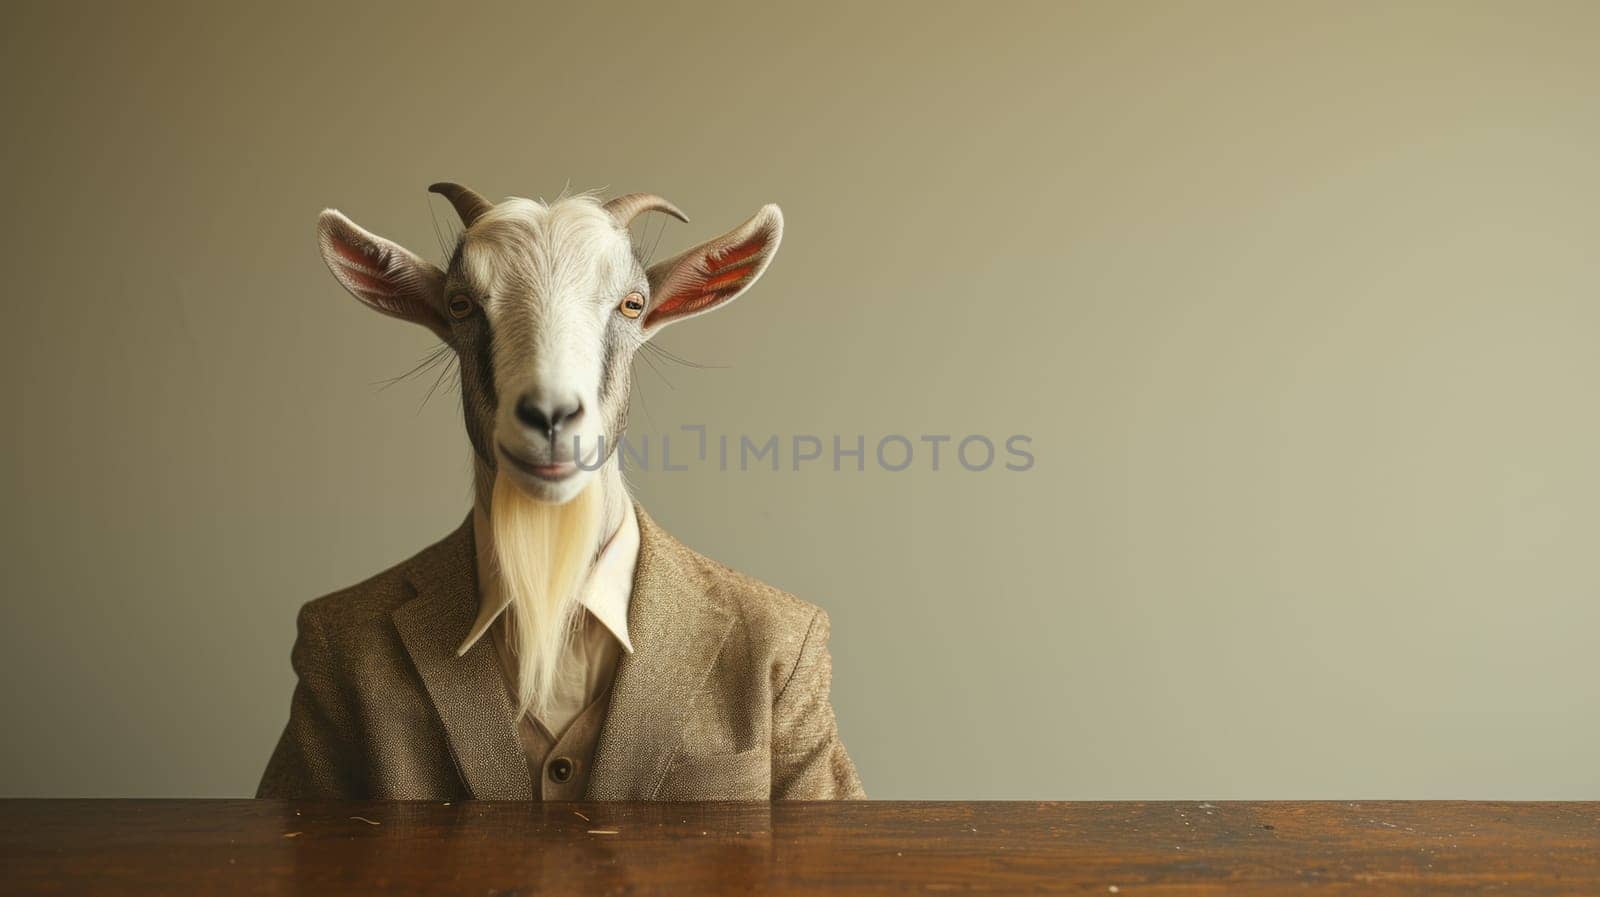 A goat wearing a suit and tie with long hair